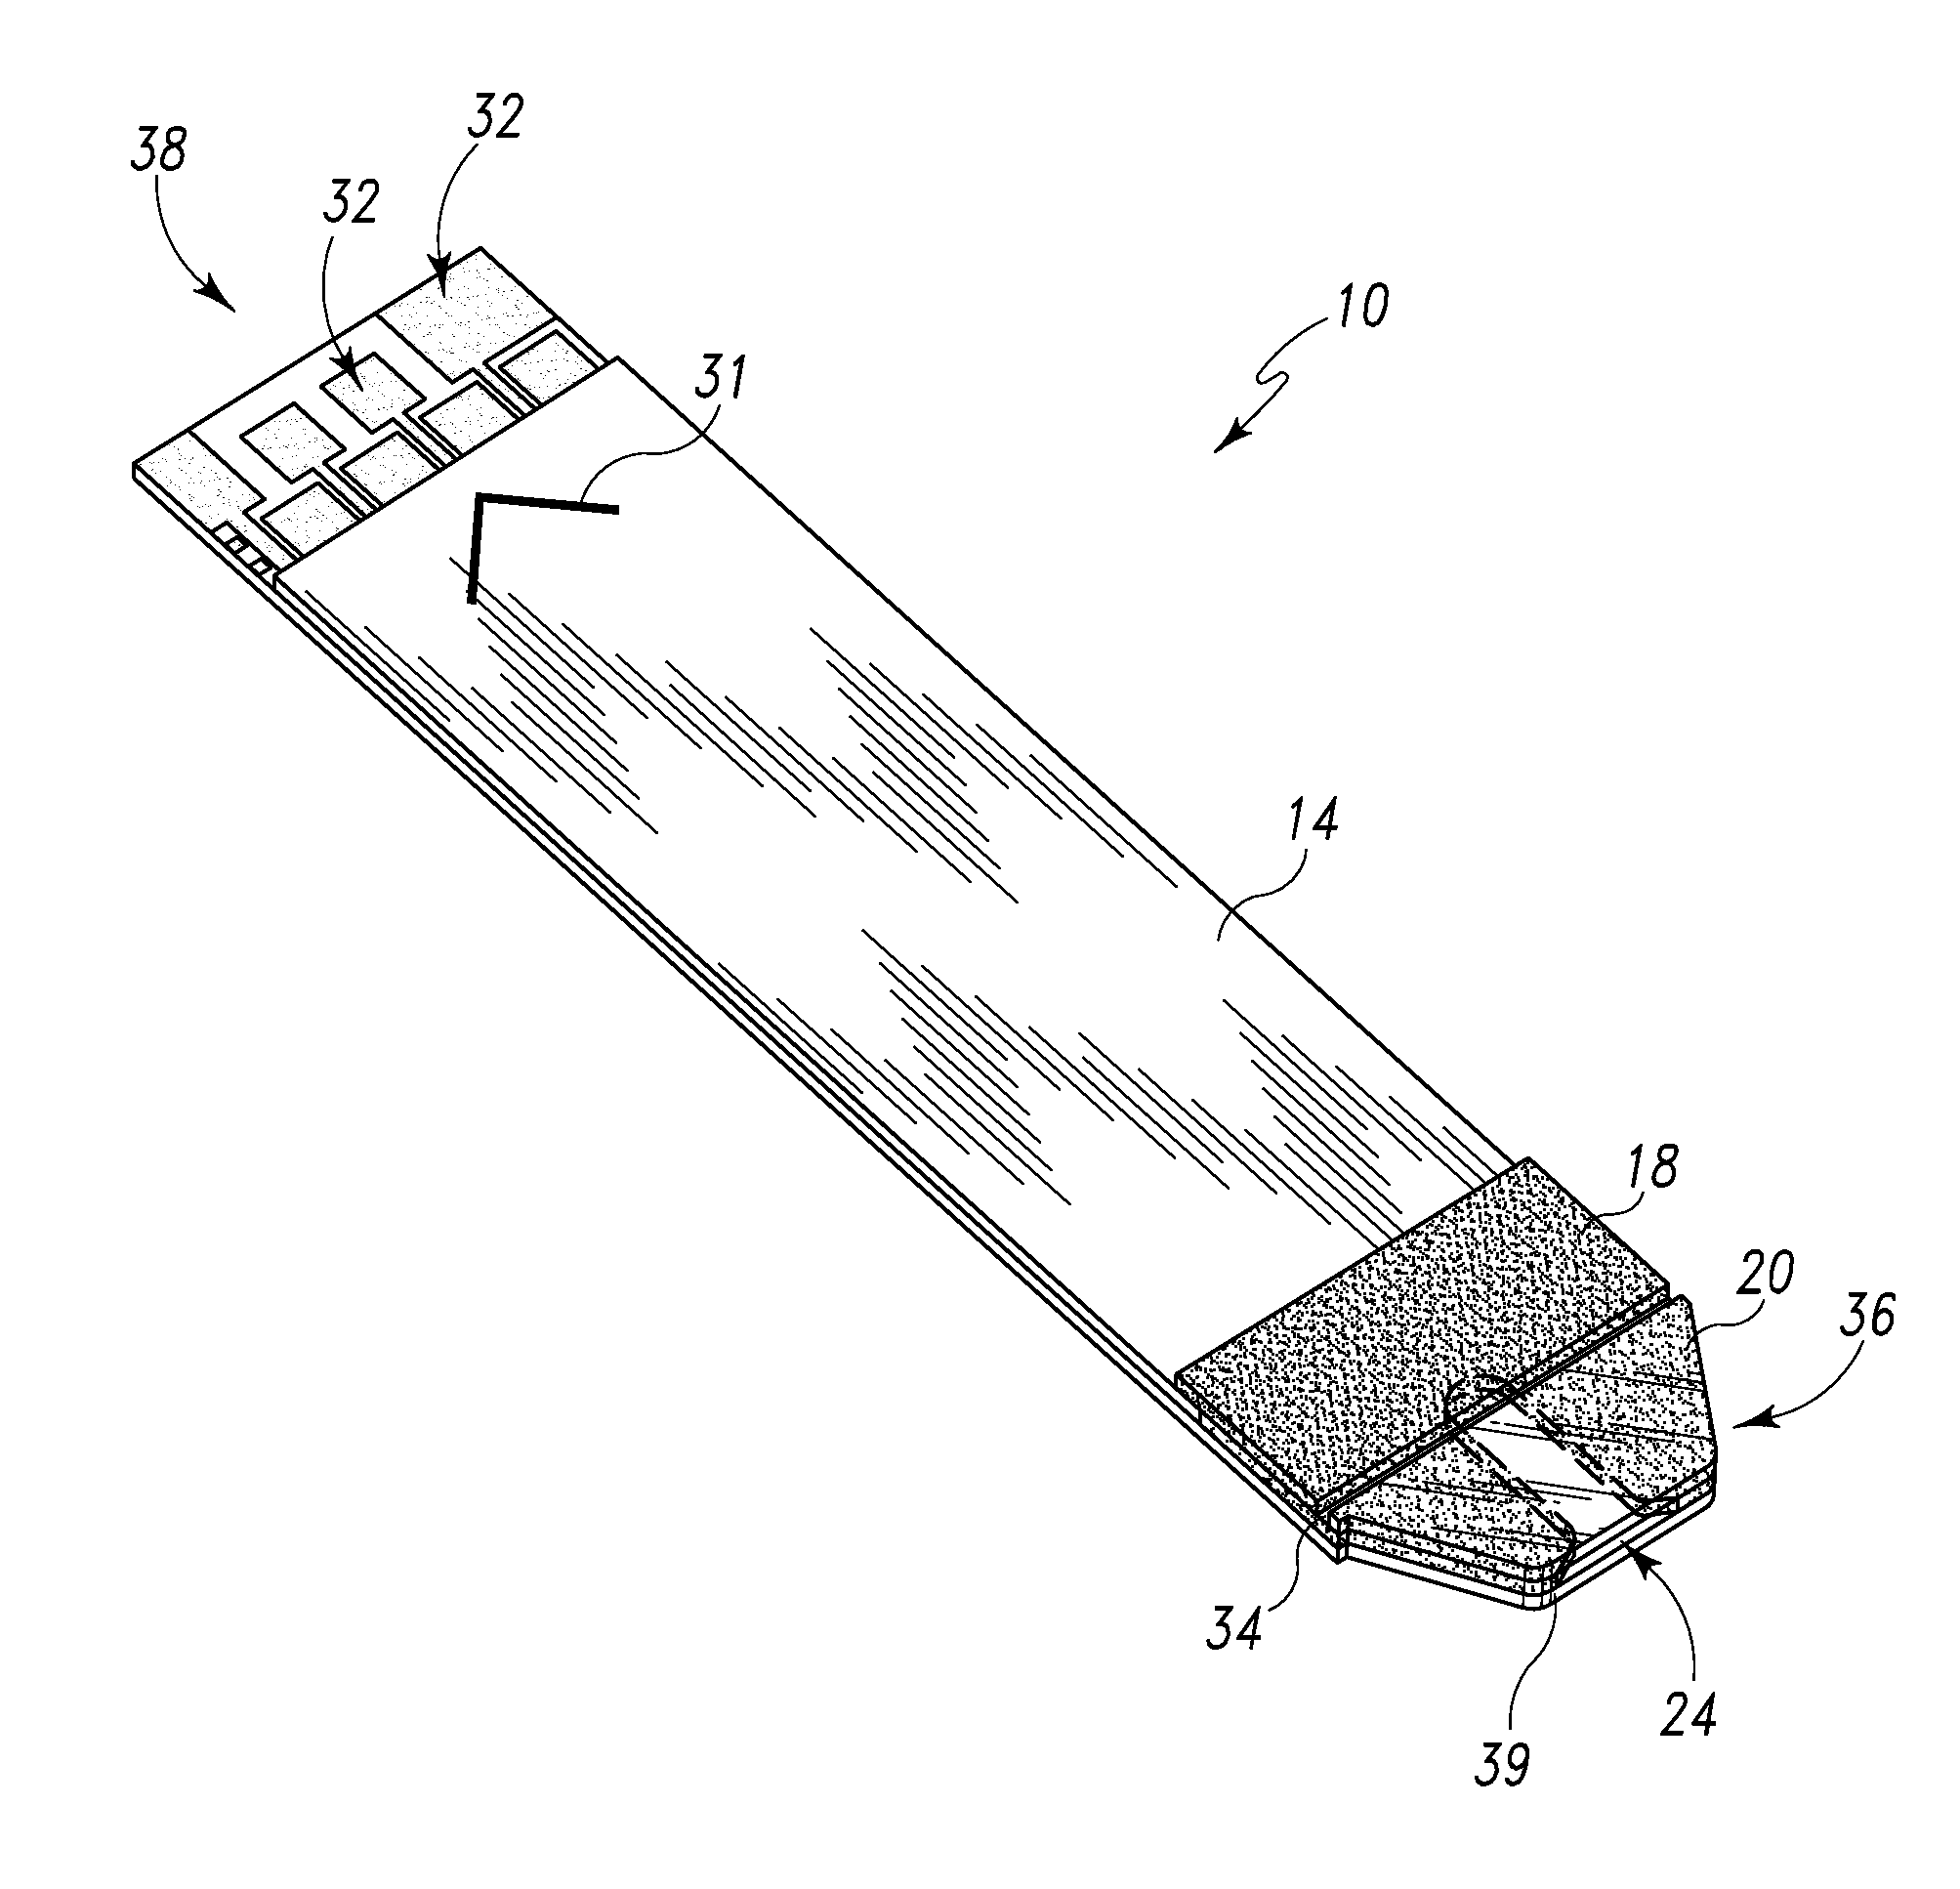 Test strip with flared sample receiving chamber